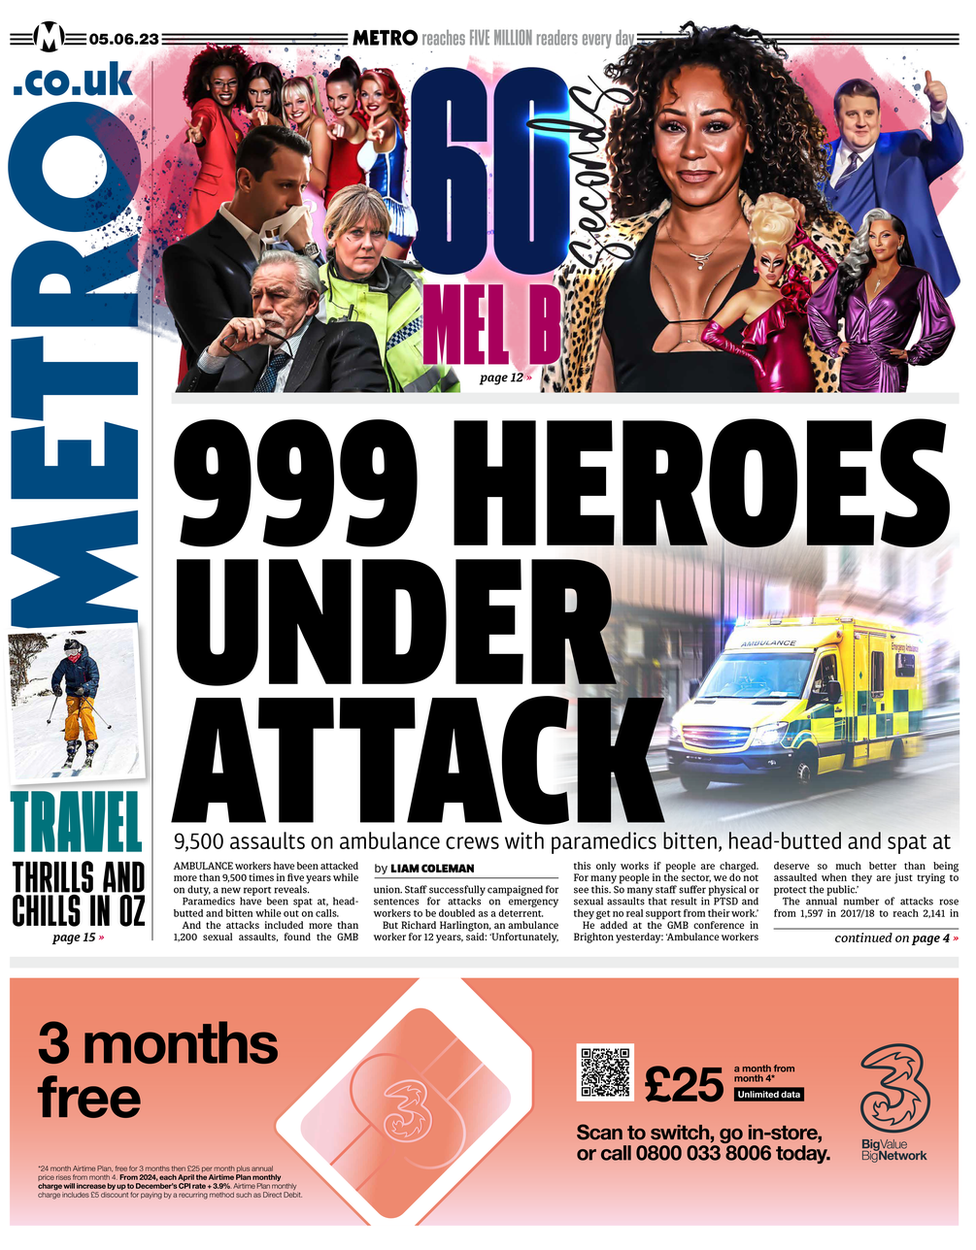 The front page of the Metro